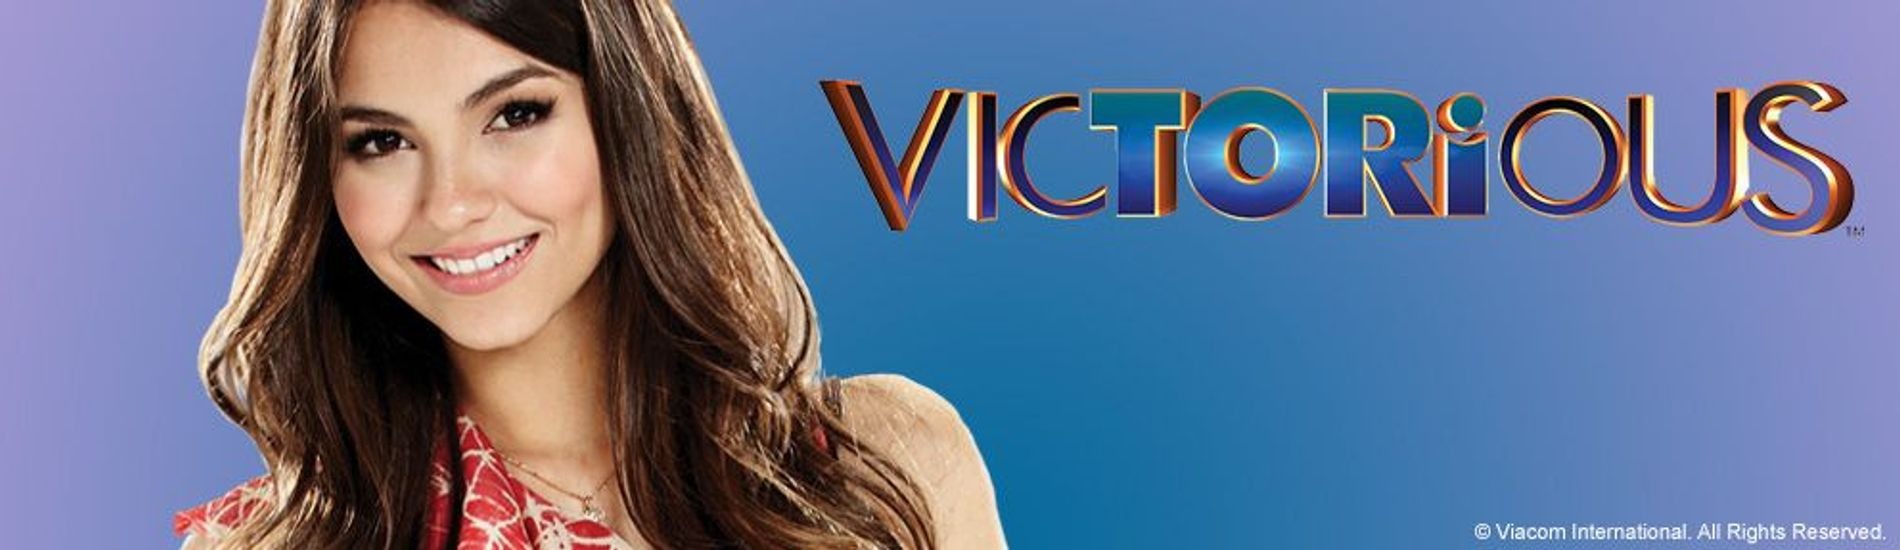 Victorious en streaming sur Gulli Replay